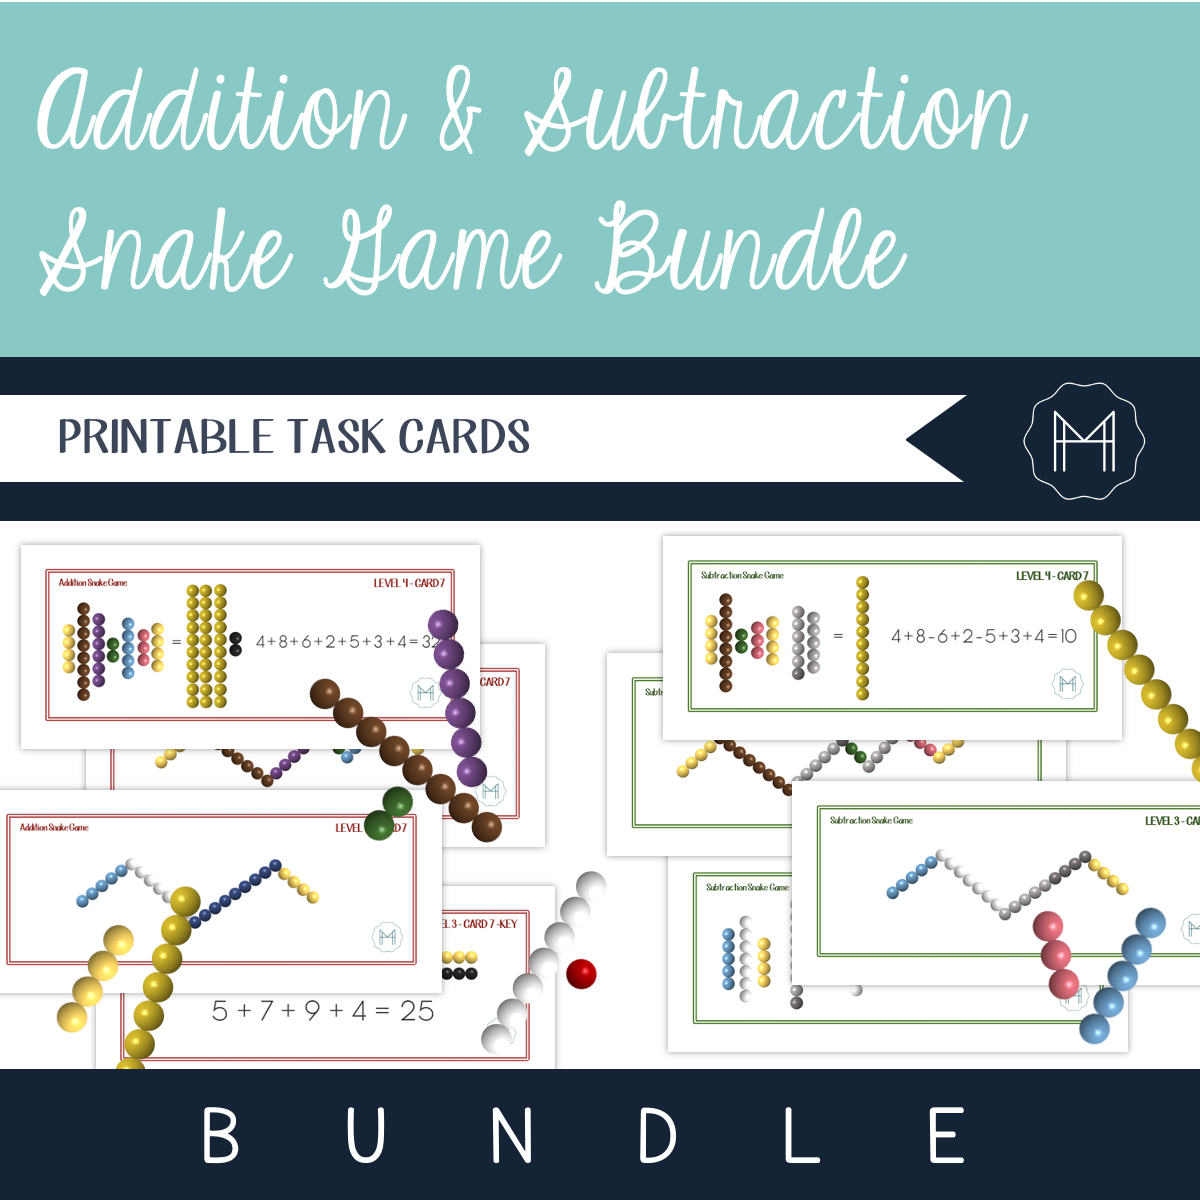 Addition and Subtraction Snake Game Bundle